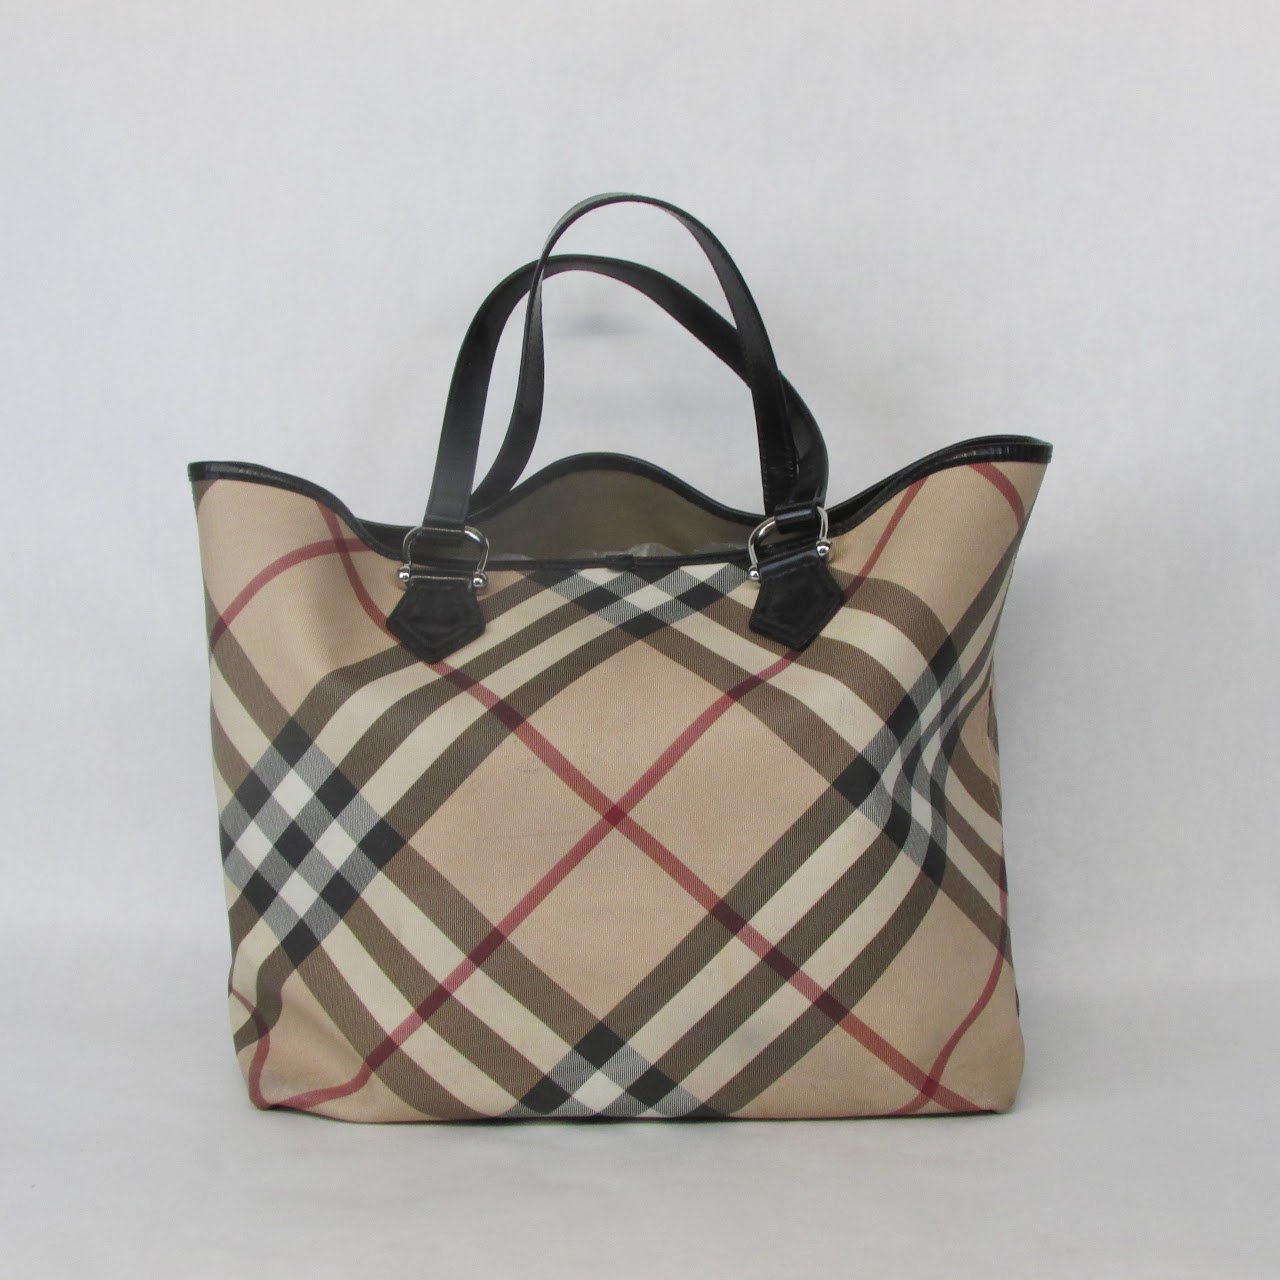 Burberry Coated Canvas Tote